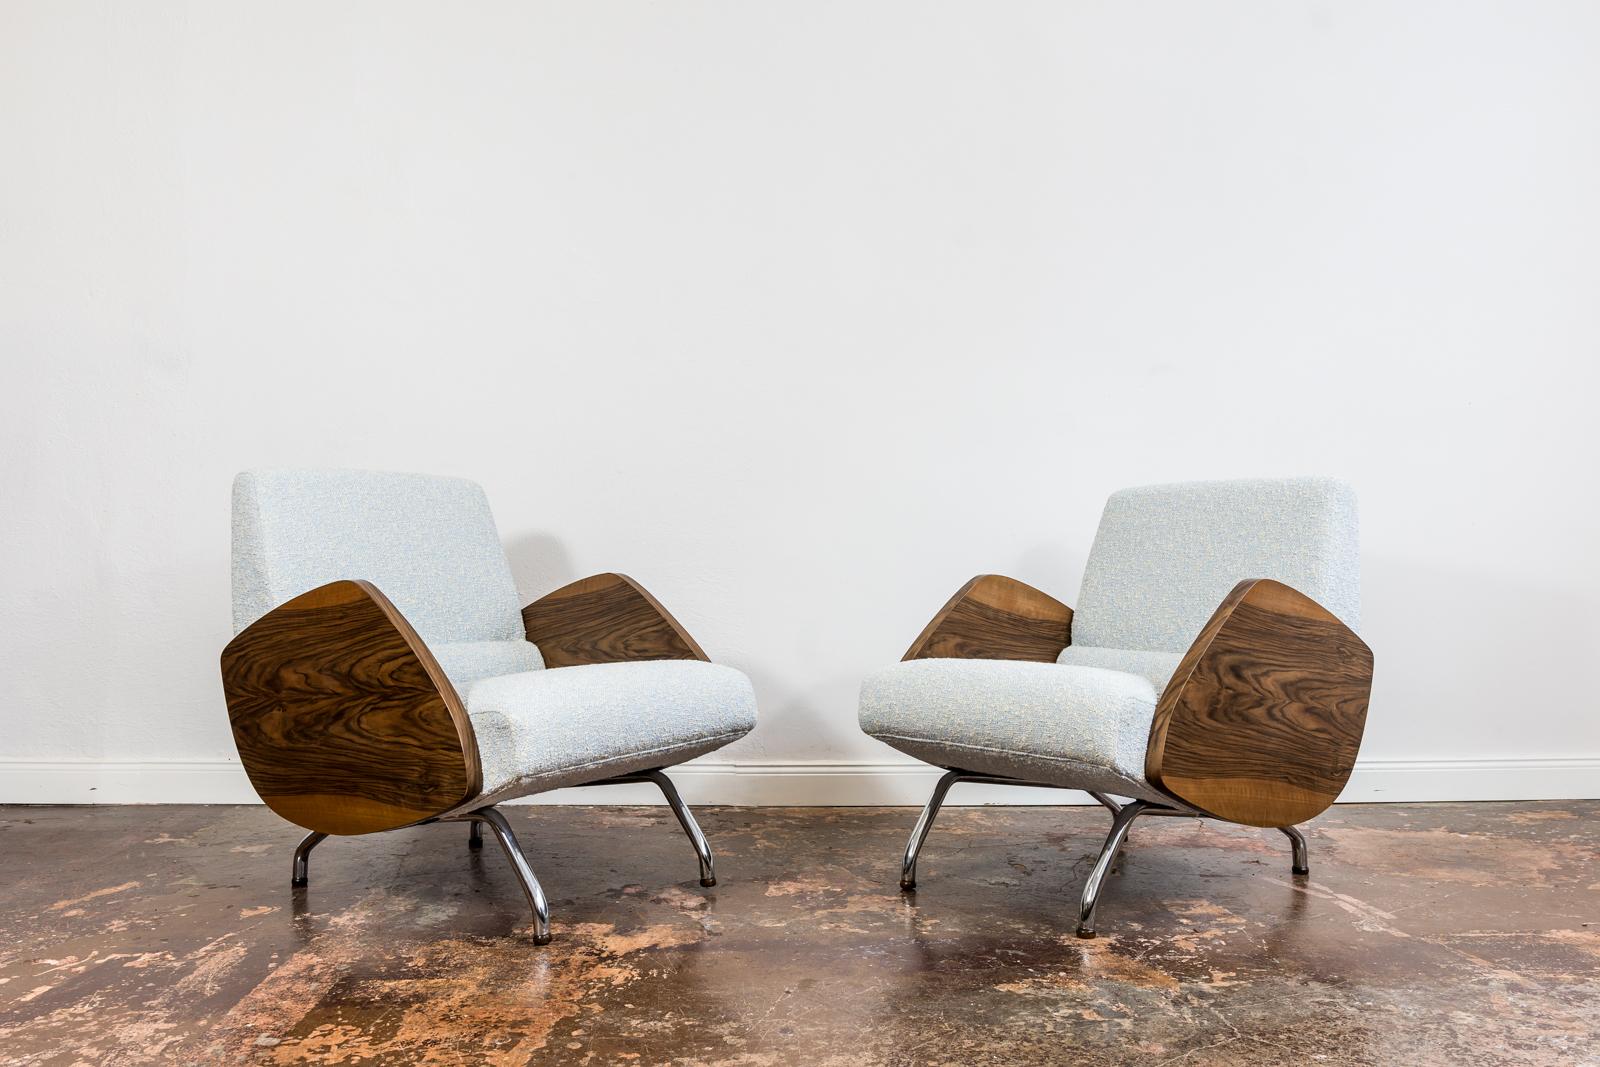 Pair of mid-century lounge chairs Model 360, designed by Janusz Rózanski in 1950's, manufactured in Poland in 1960's.

This model belongs to the group of icons of Polish design, it is highly recognized but also very rare due to the suspension of